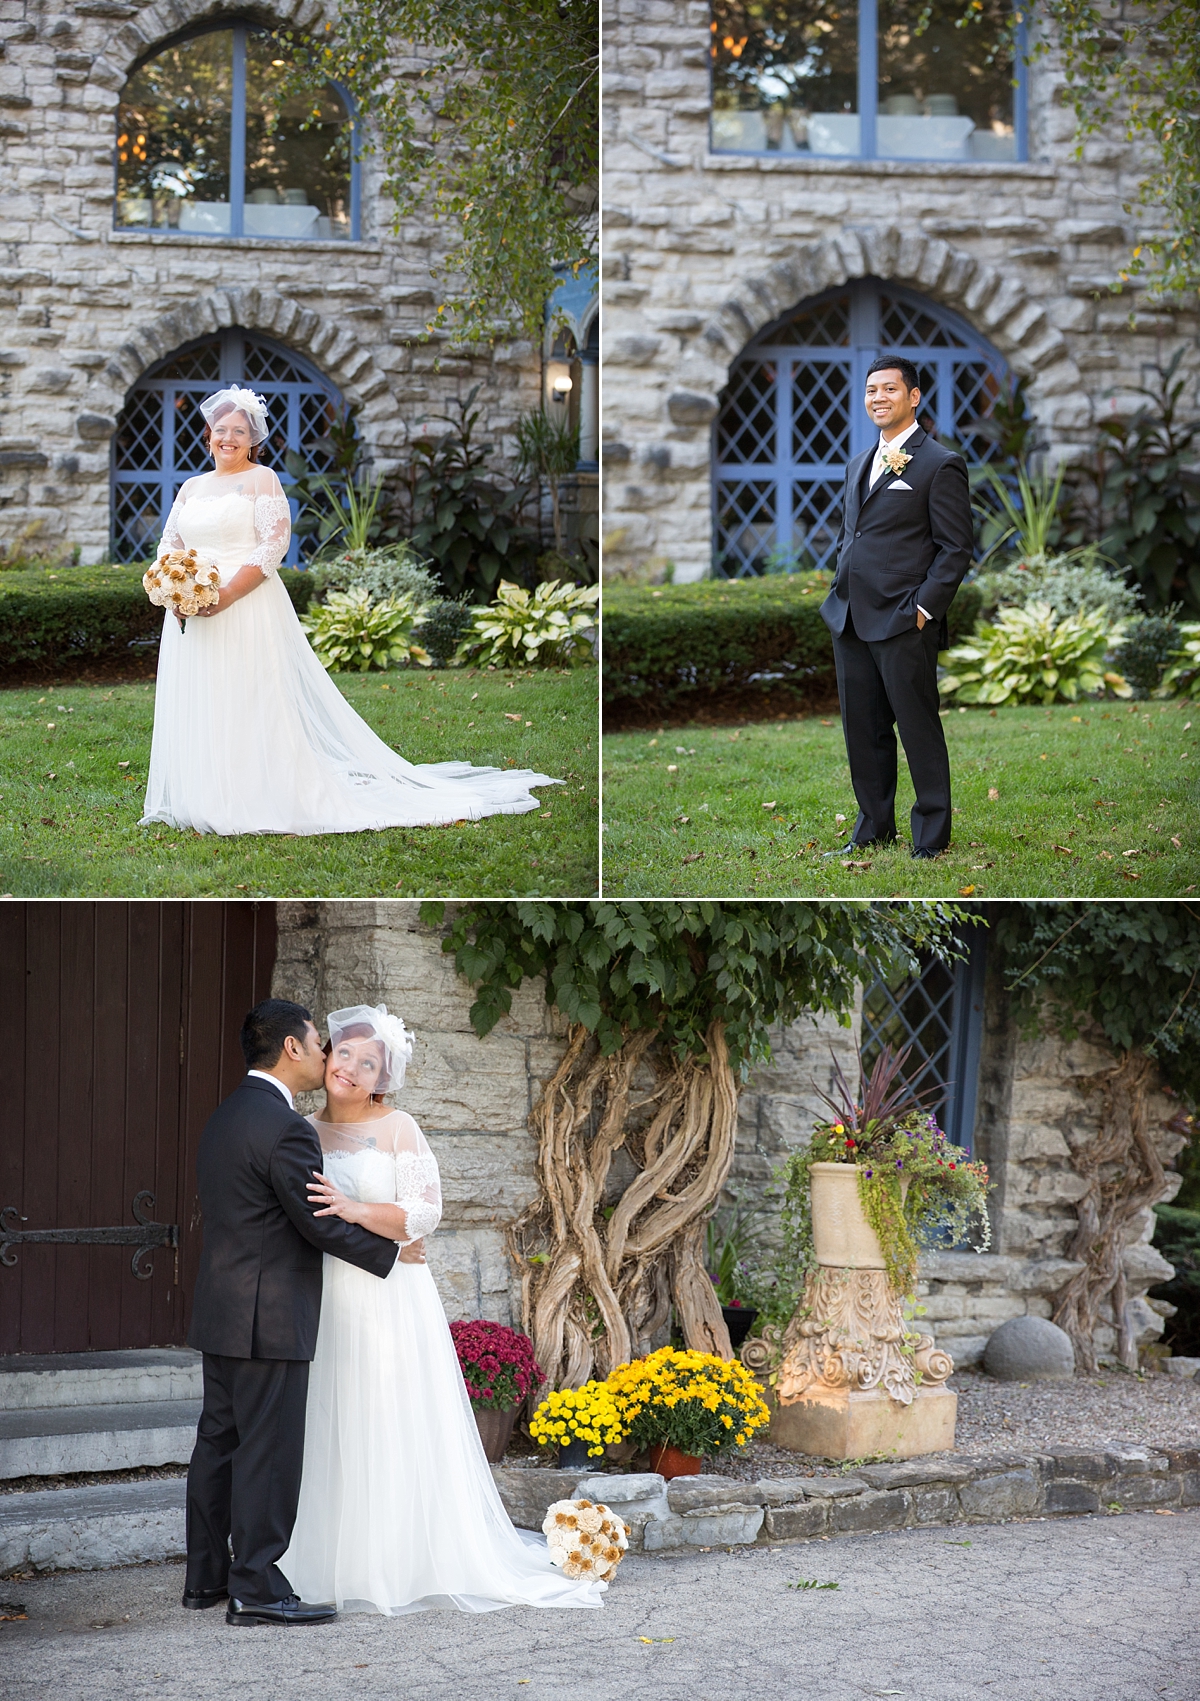 beardslee castle, little falls, ny, sarah heppell photography, bride in front of castle, groom in front of castle, bride and groom in front of beardslee castle